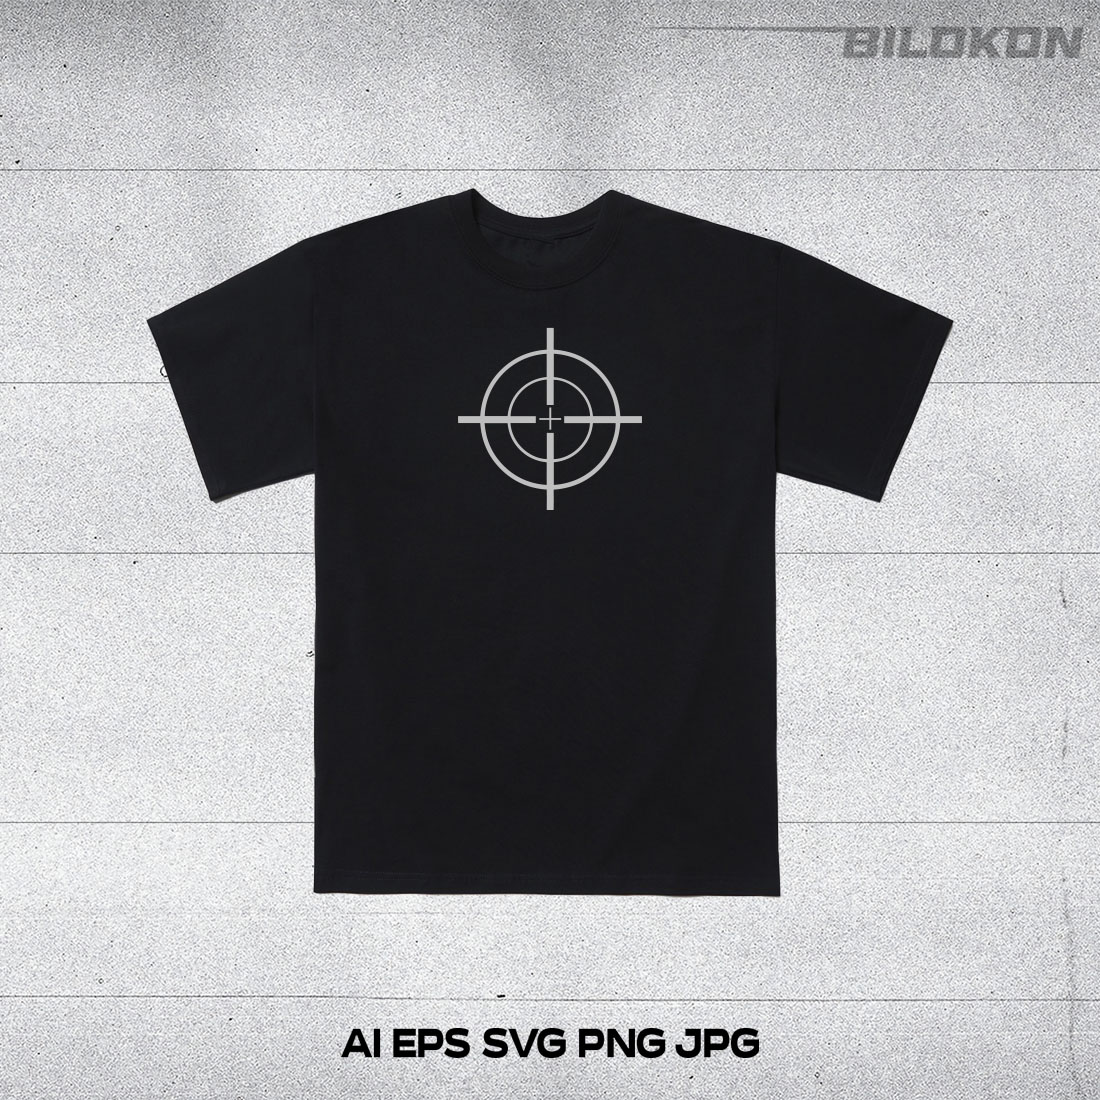 T-shirt Weapon Targeting Pointers SVG Vector cover image.